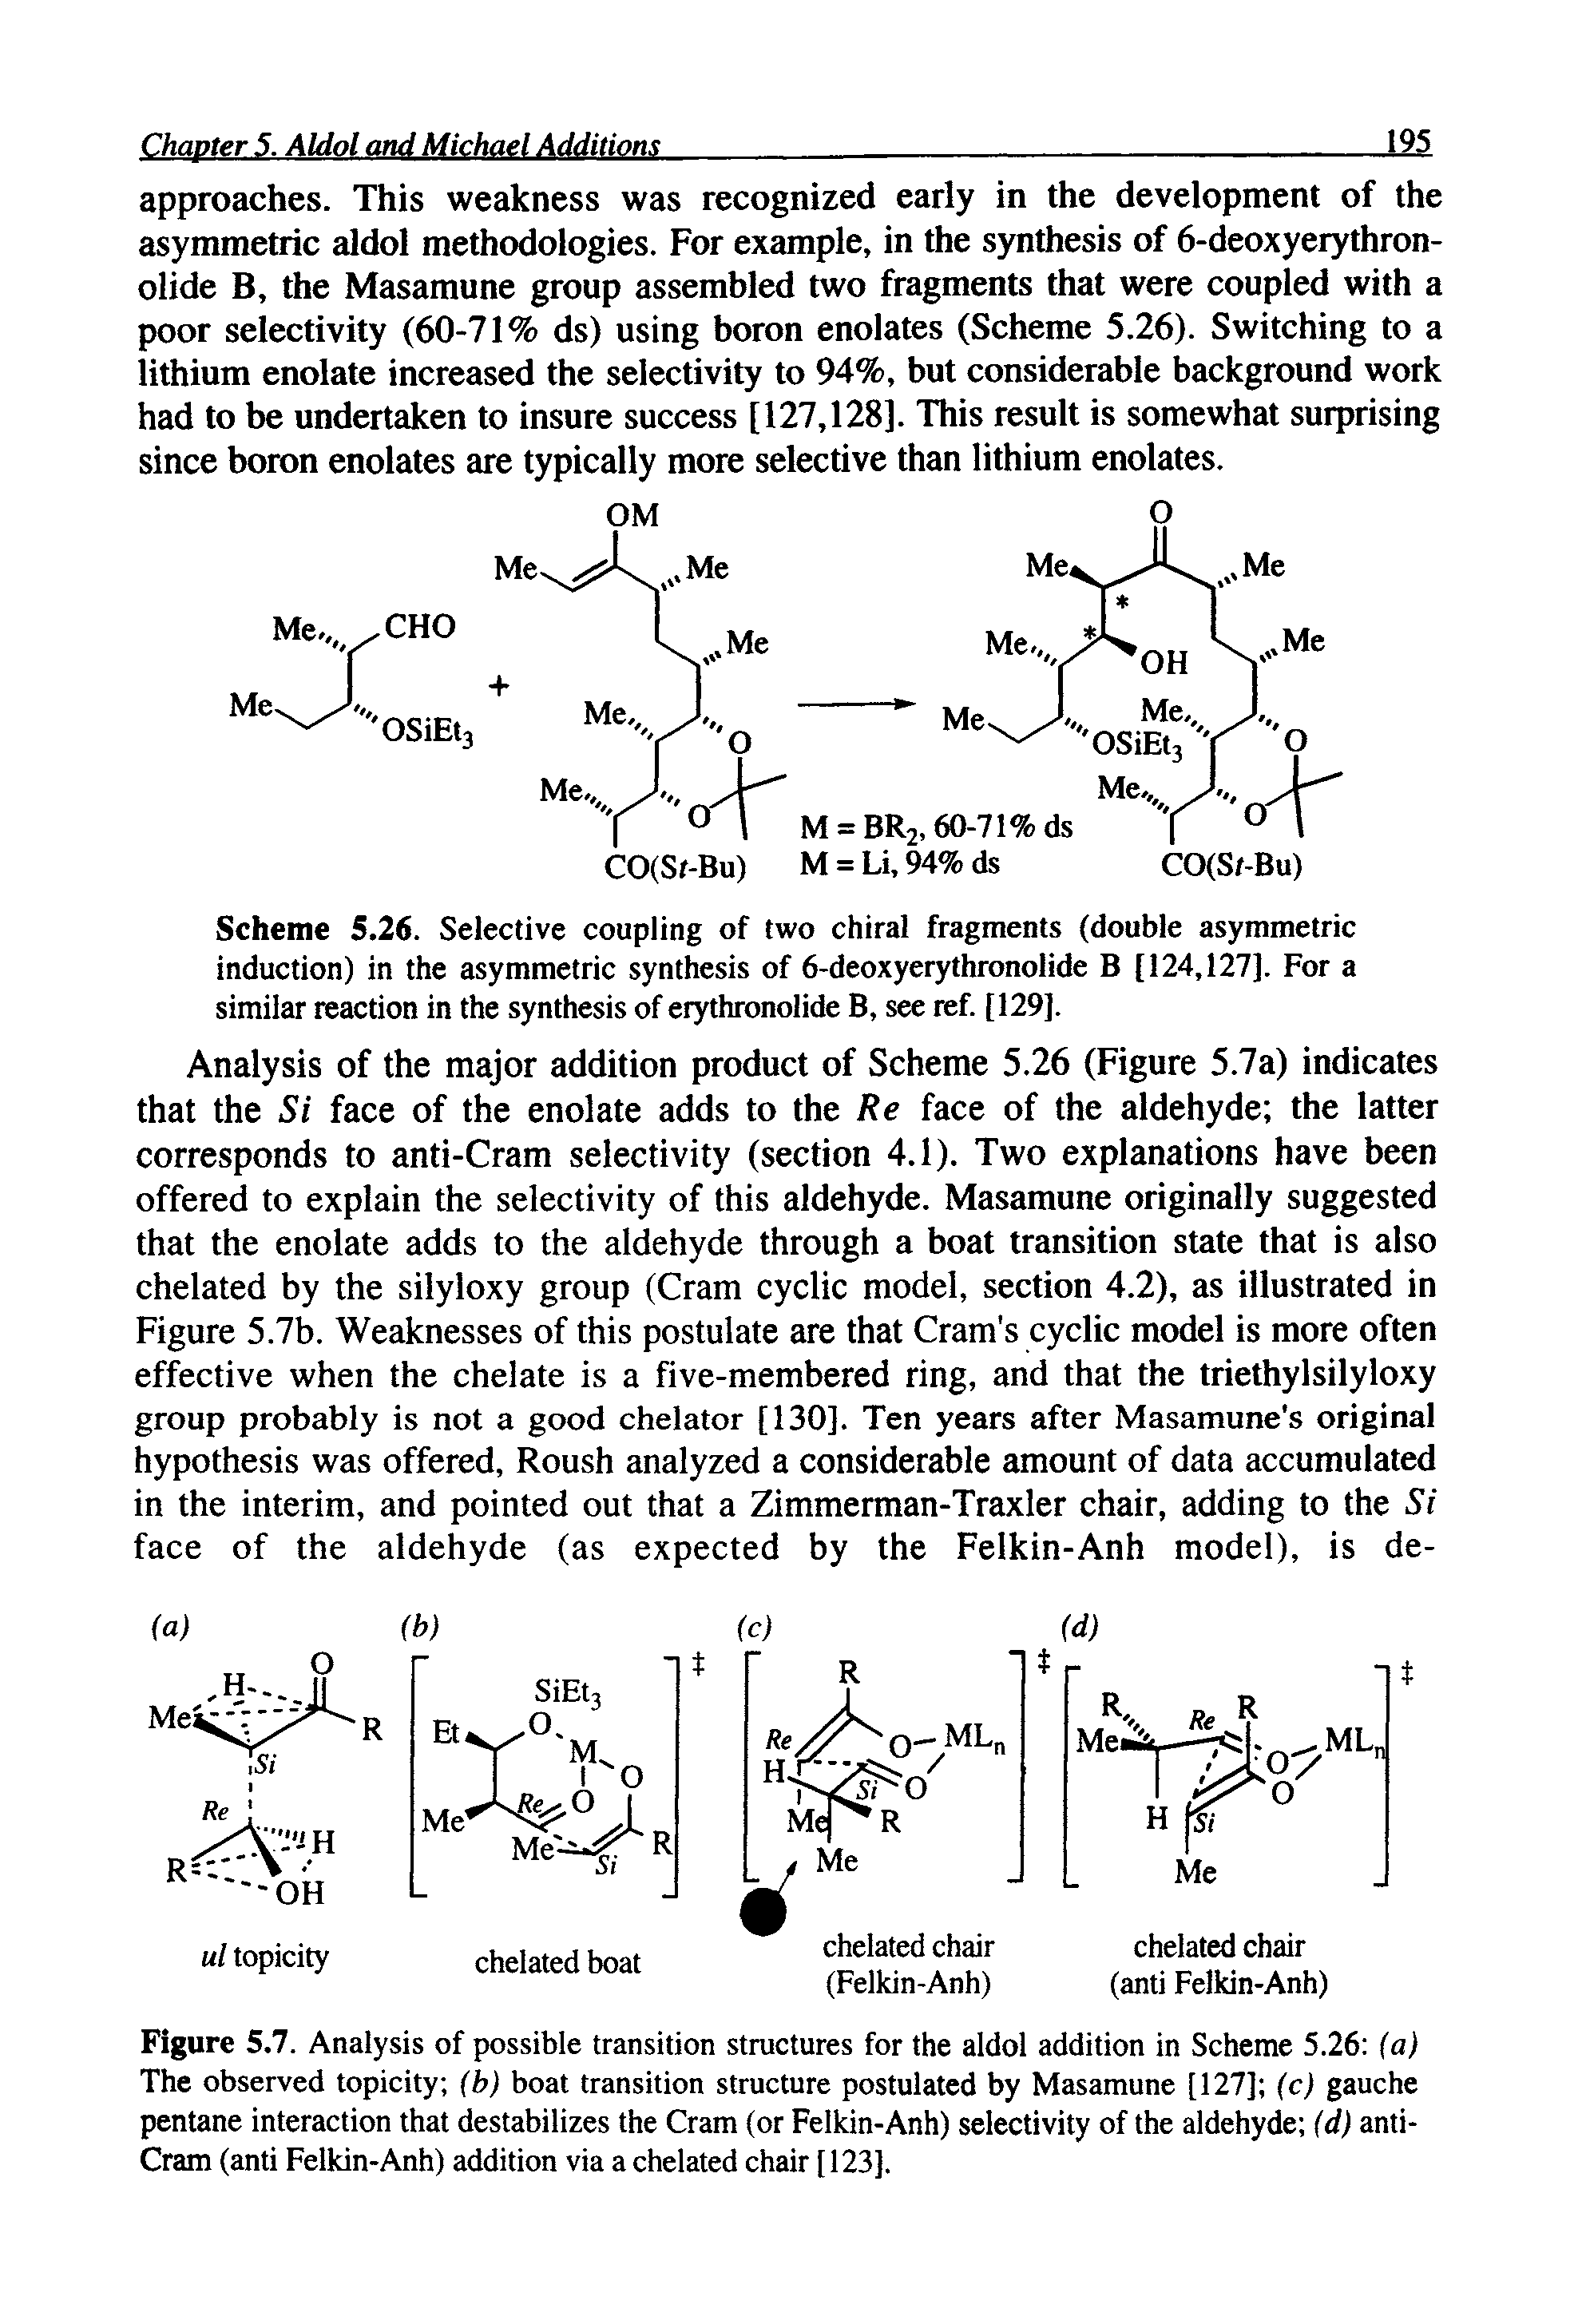 Figure 5.7. Analysis of possible transition structures for the aldol addition in Scheme 5.26 (a) The observed topicity (b) boat transition structure postulated by Masamune [127] (c) gauche pentane interaction that destabilizes the Cram (or Felkin-Anh) selectivity of the aldehyde (d) anti-Cram (anti Felkin-Anh) addition via a chelated chair [123].